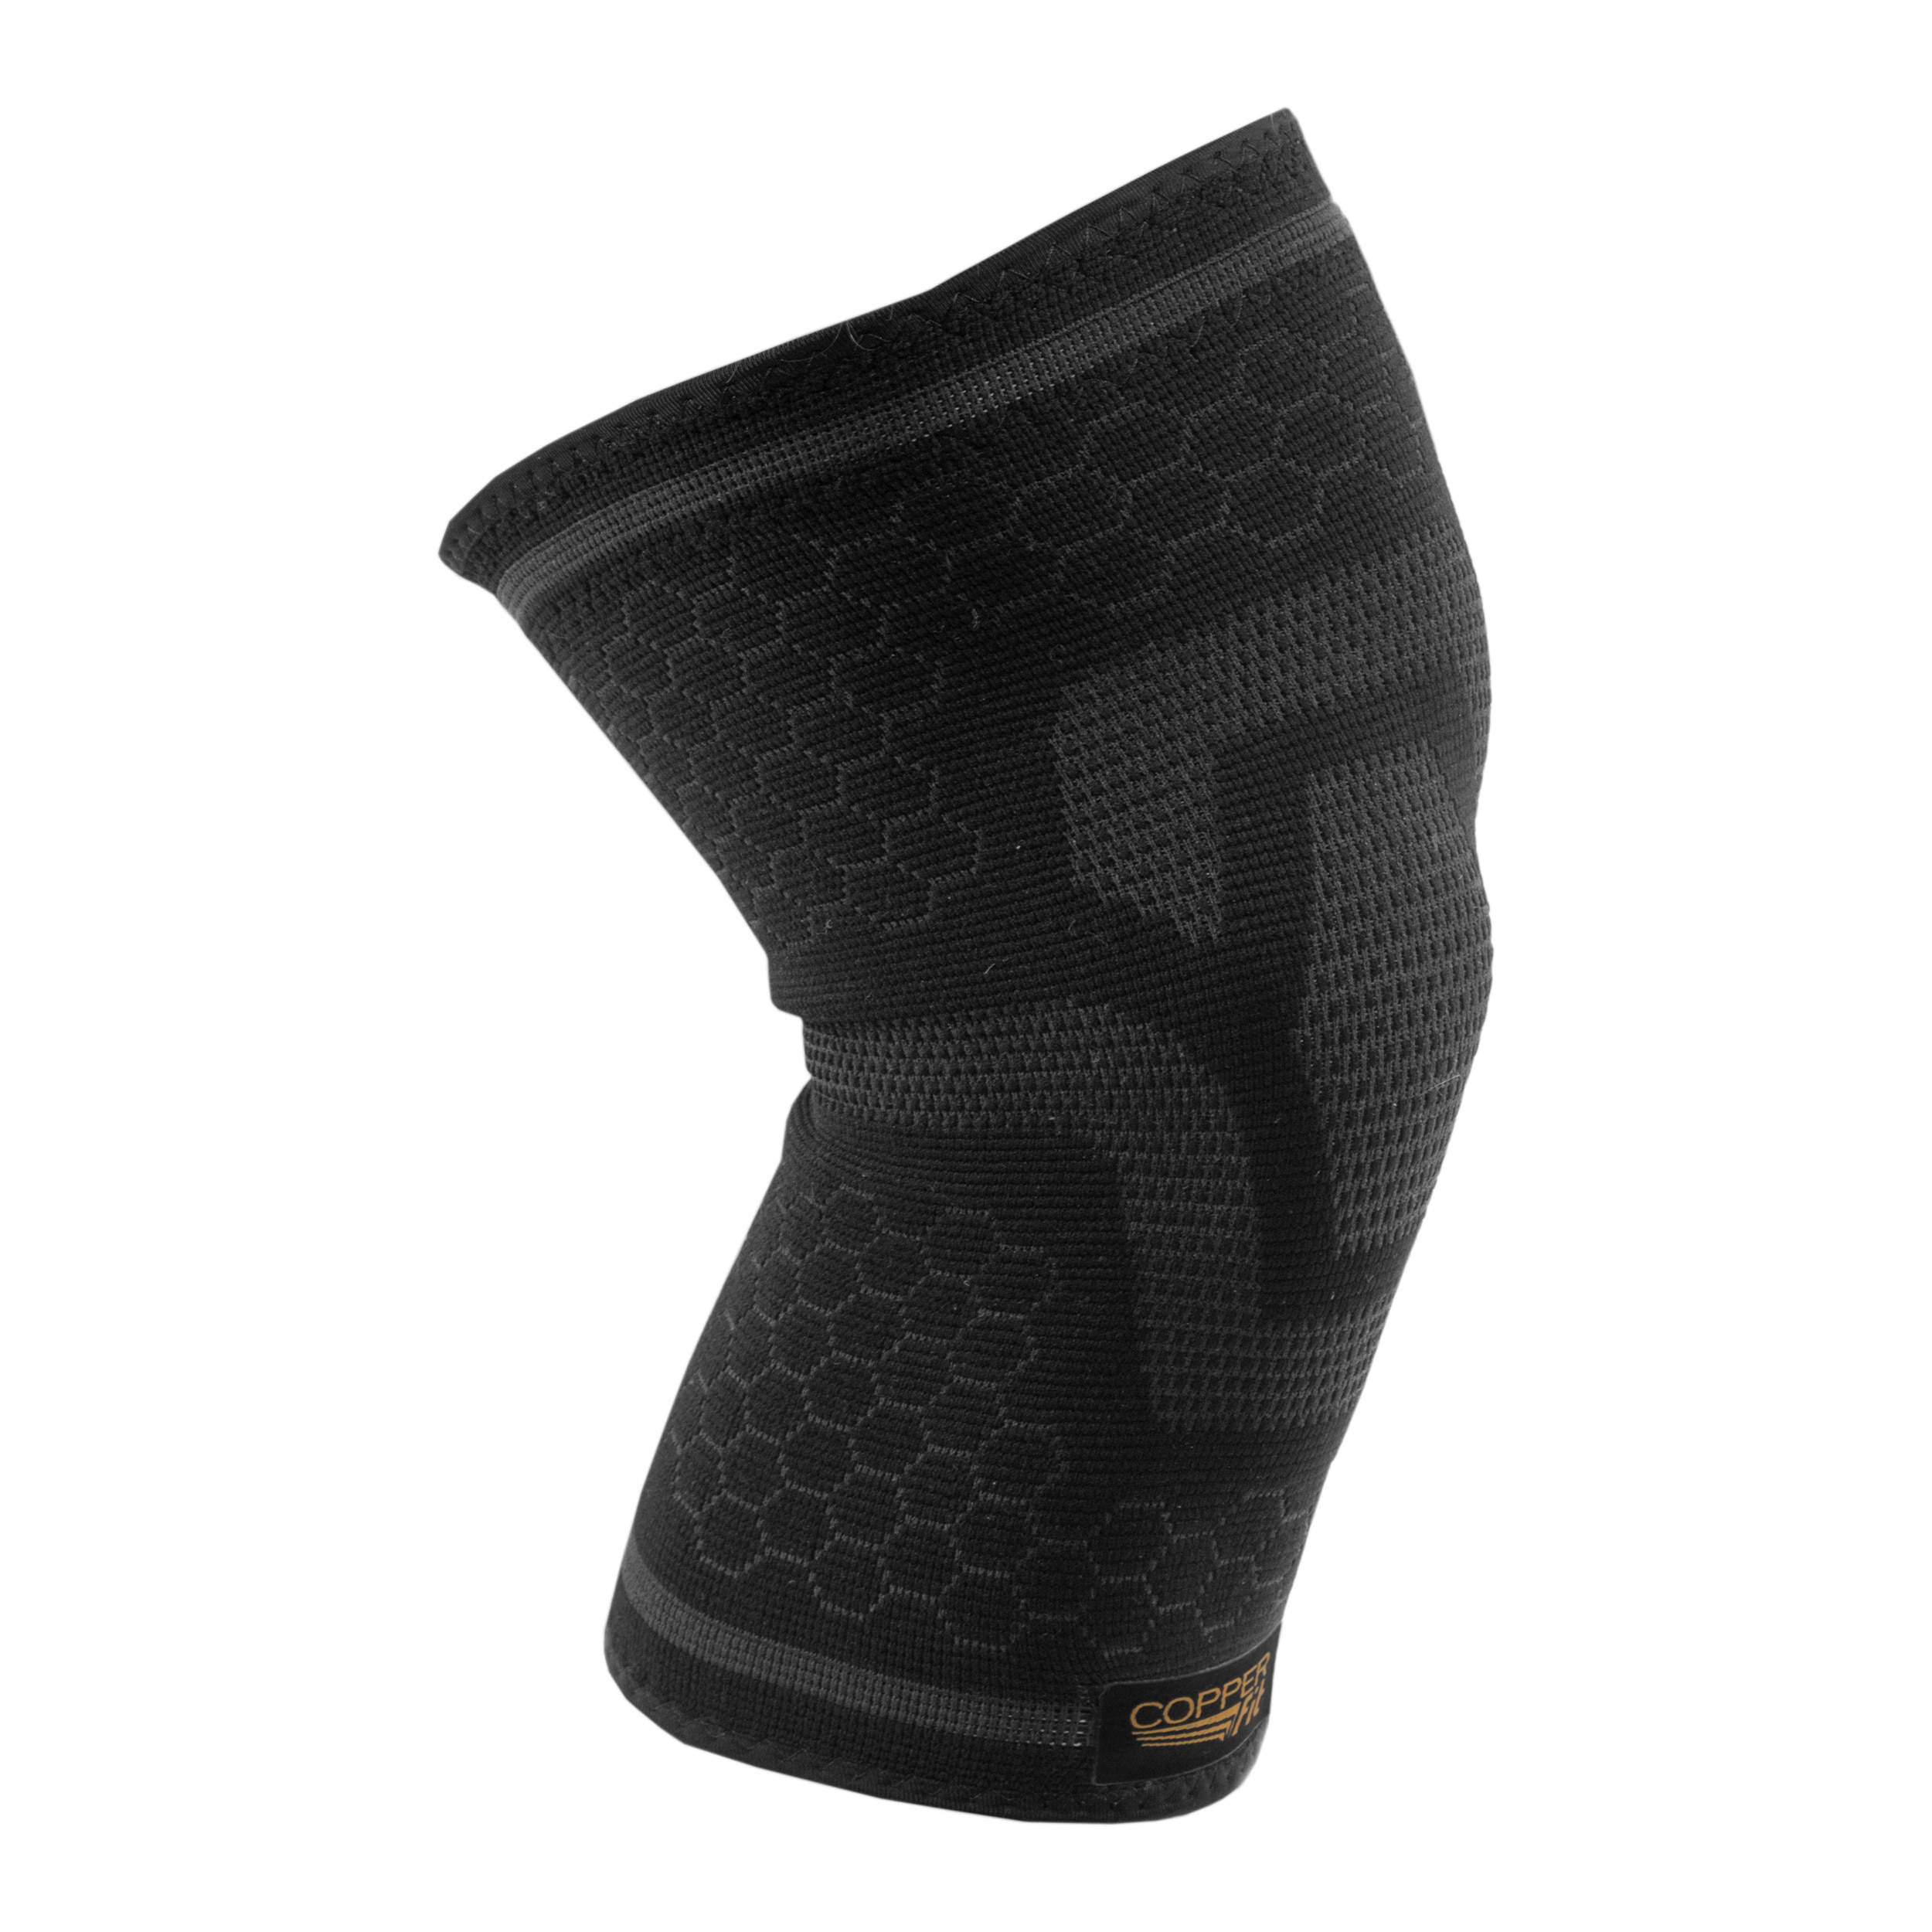 Copper Fit Black Knee Brace with Moderate Compression, Contoured